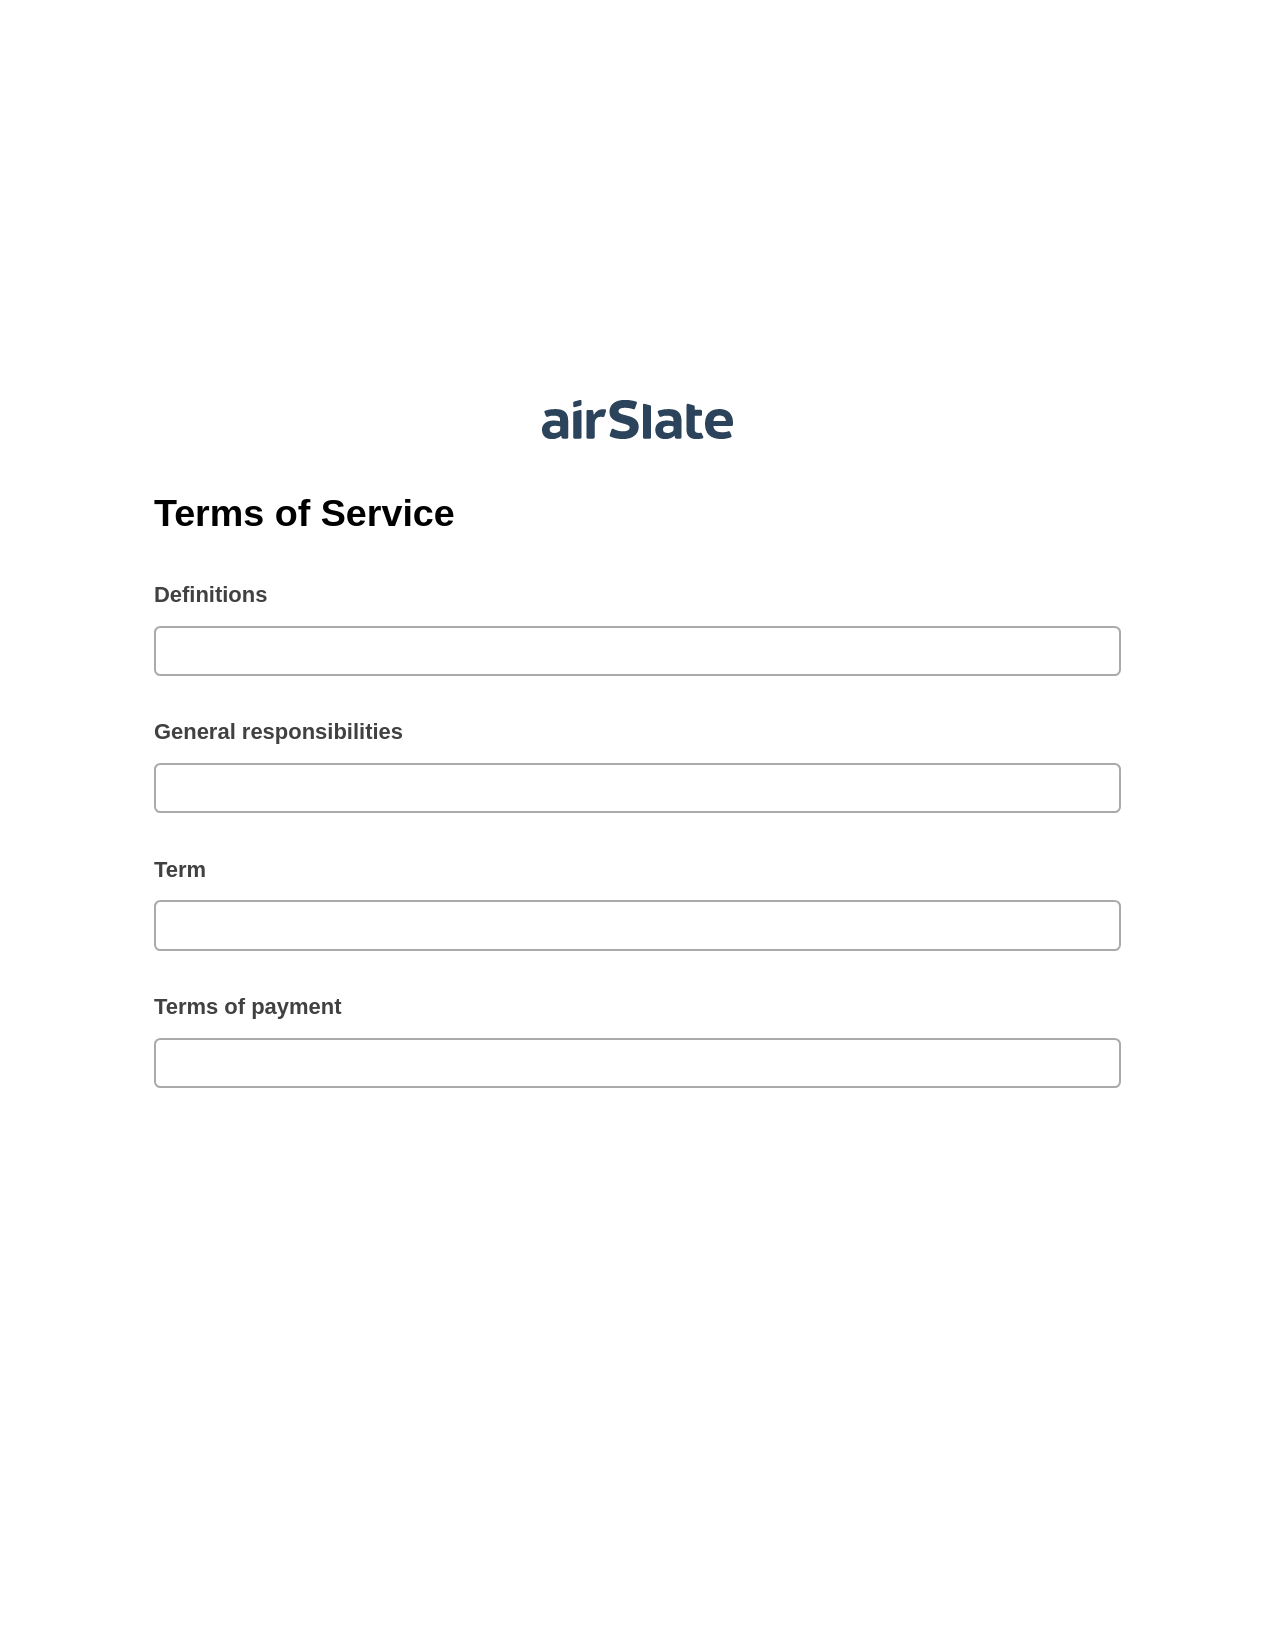 Terms of Service Pre-fill from Salesforce Record Bot, 1Create Slate every Google Sheet Update Bot, Export to Salesforce Bot